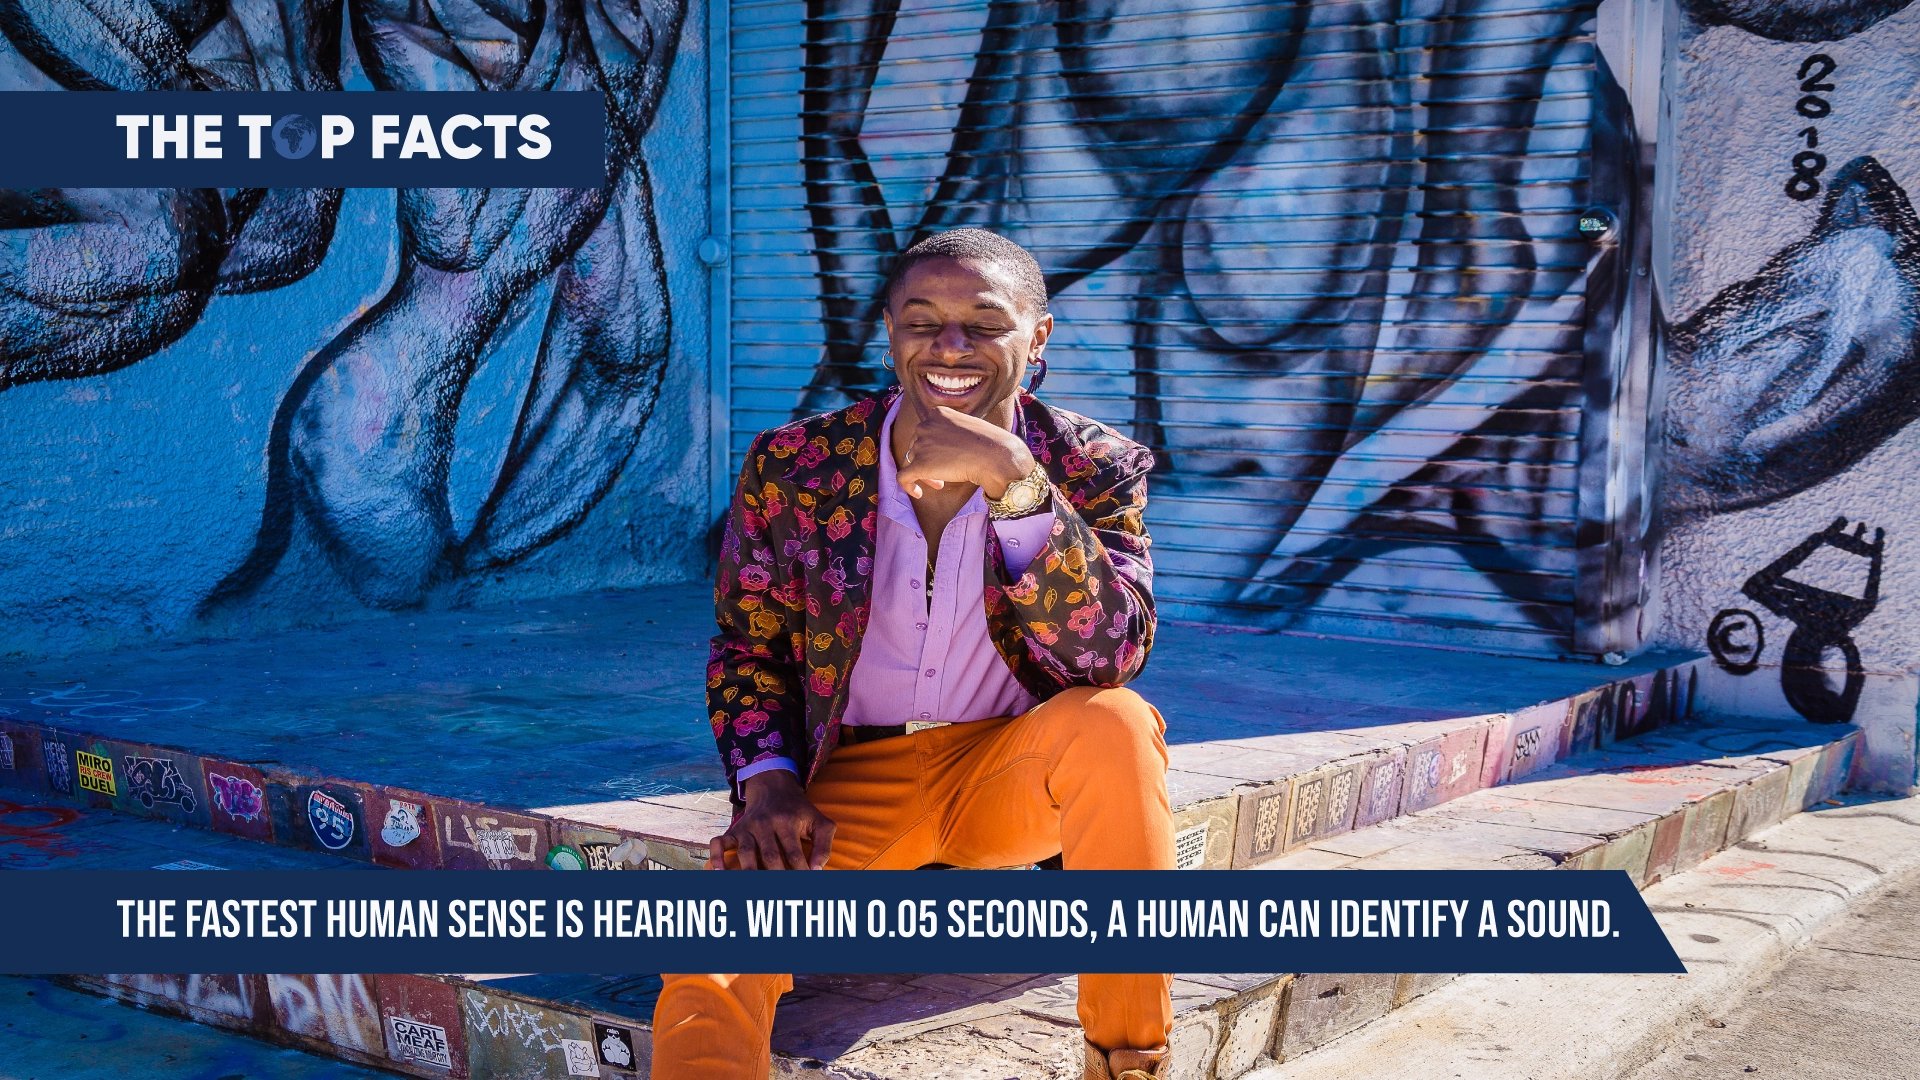 The fastest human sense is hearing. Within 0.05 seconds, a human can identify a sound